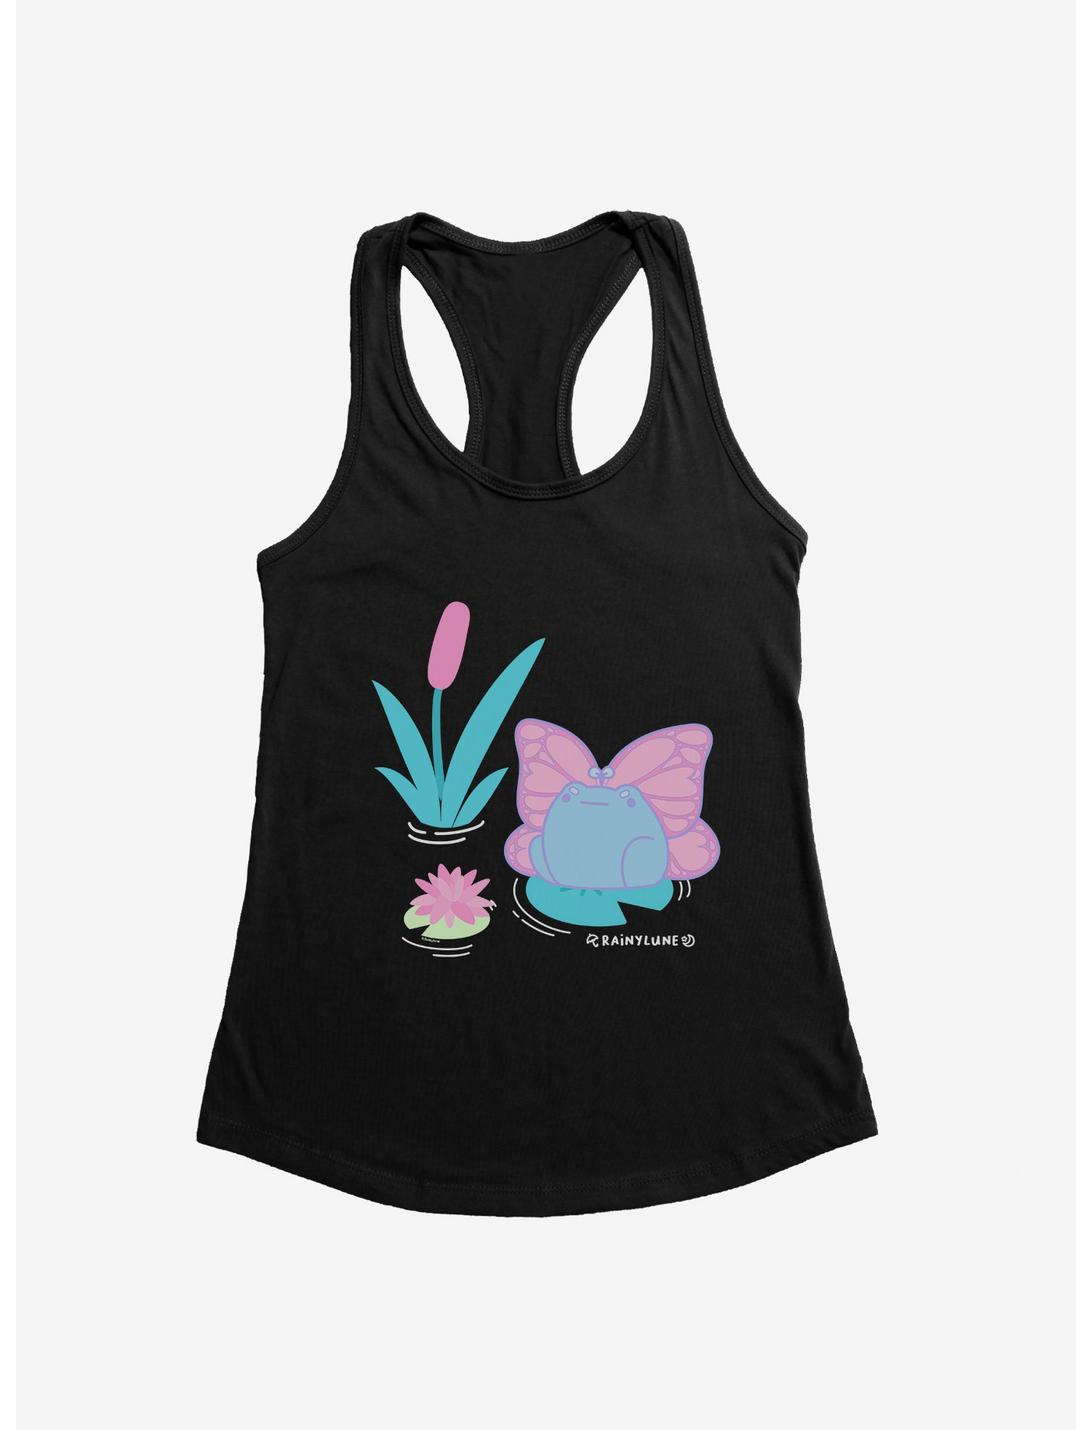 Rainylune Sprout The Frog Butterfly Girls Tank, BLACK, hi-res